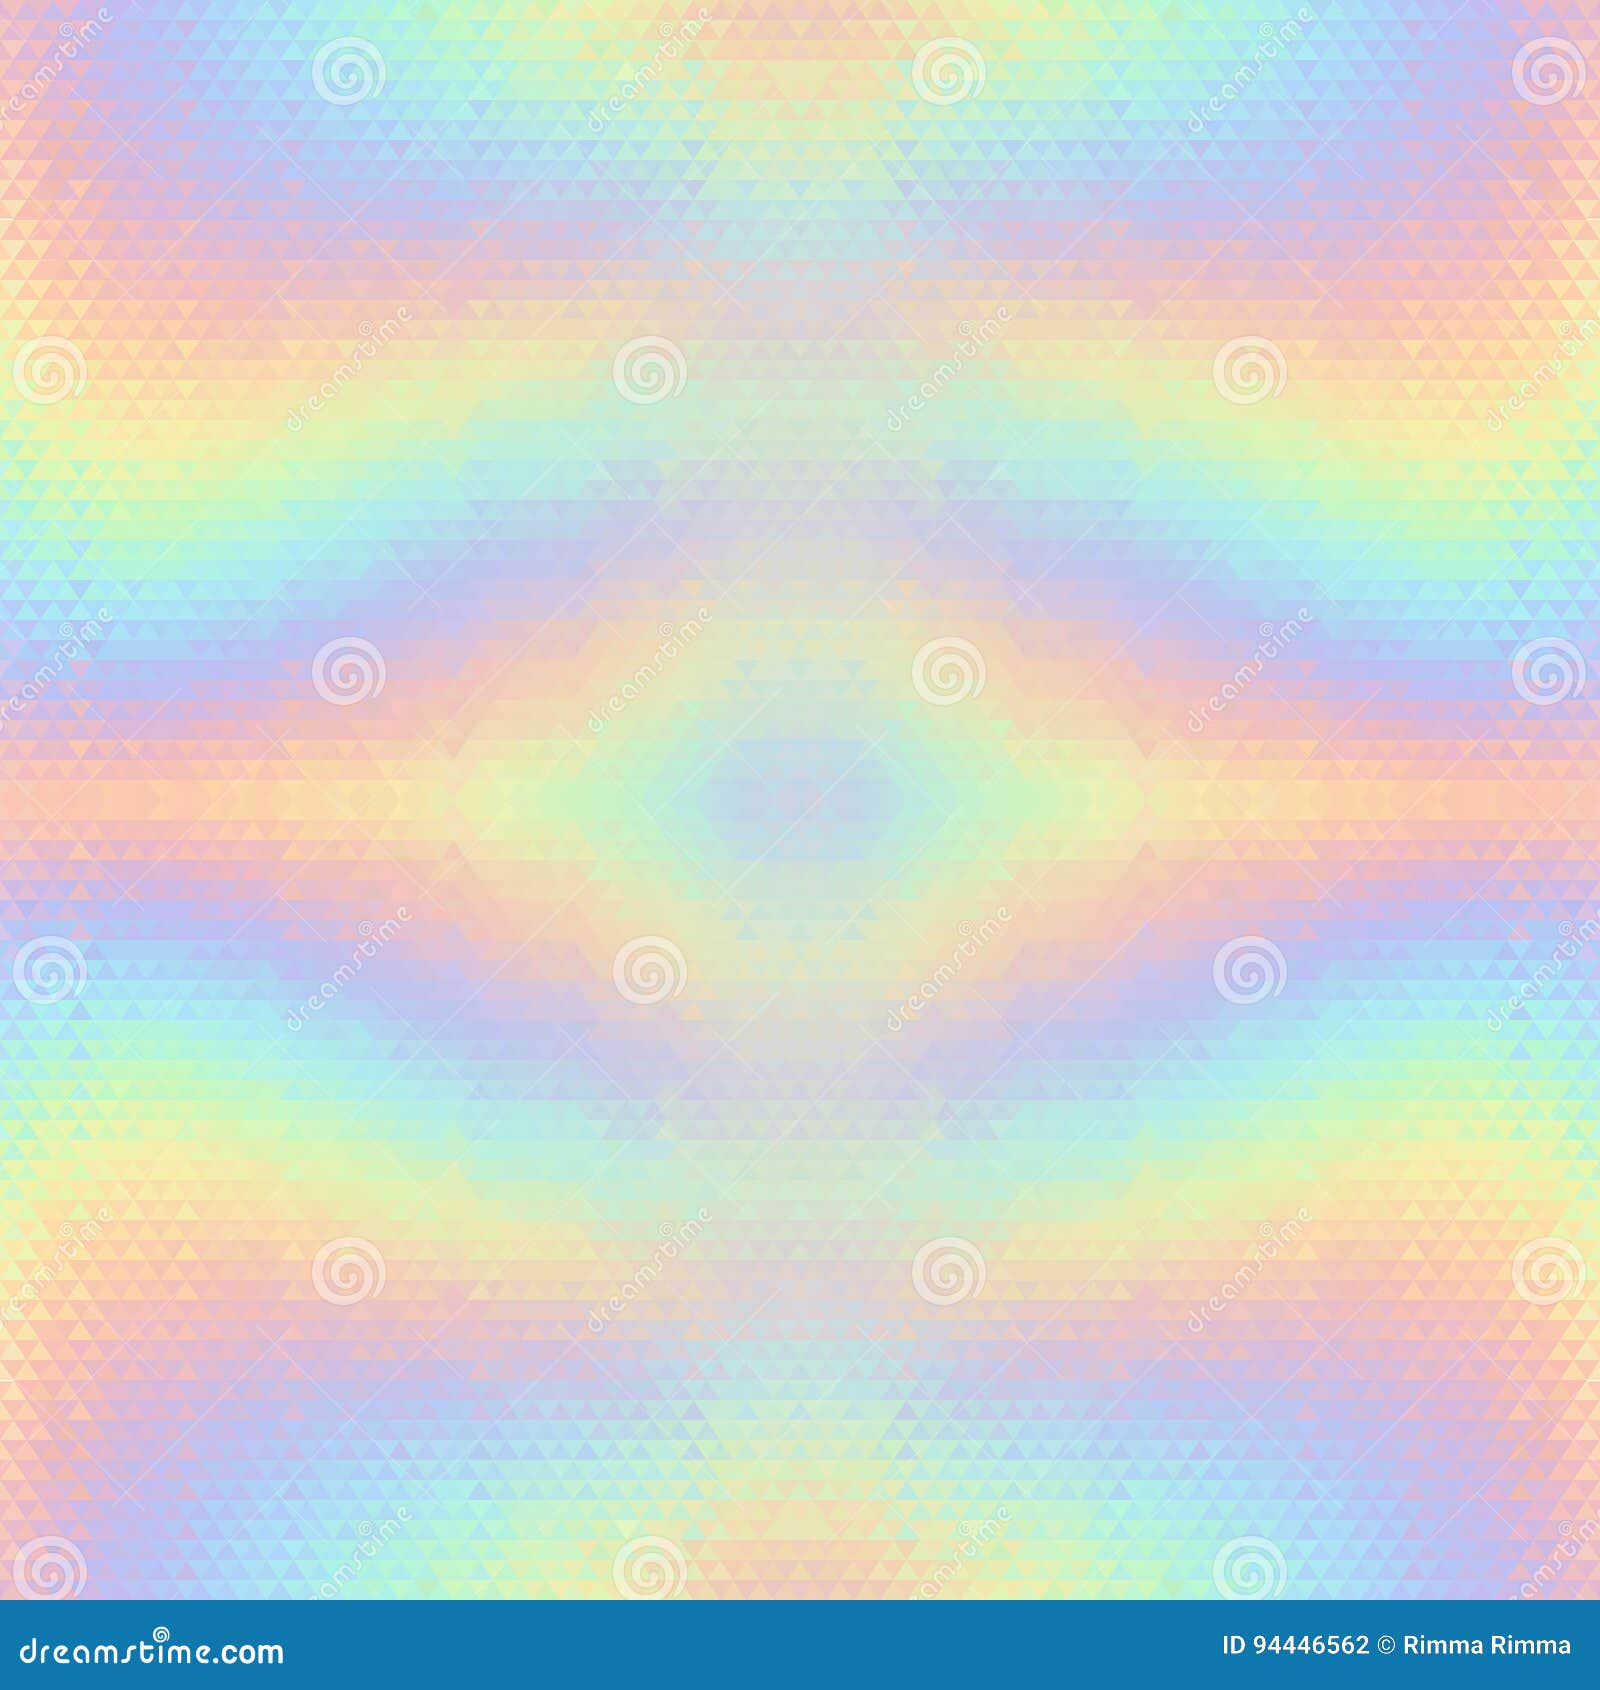 abstract holographic  seamless background.